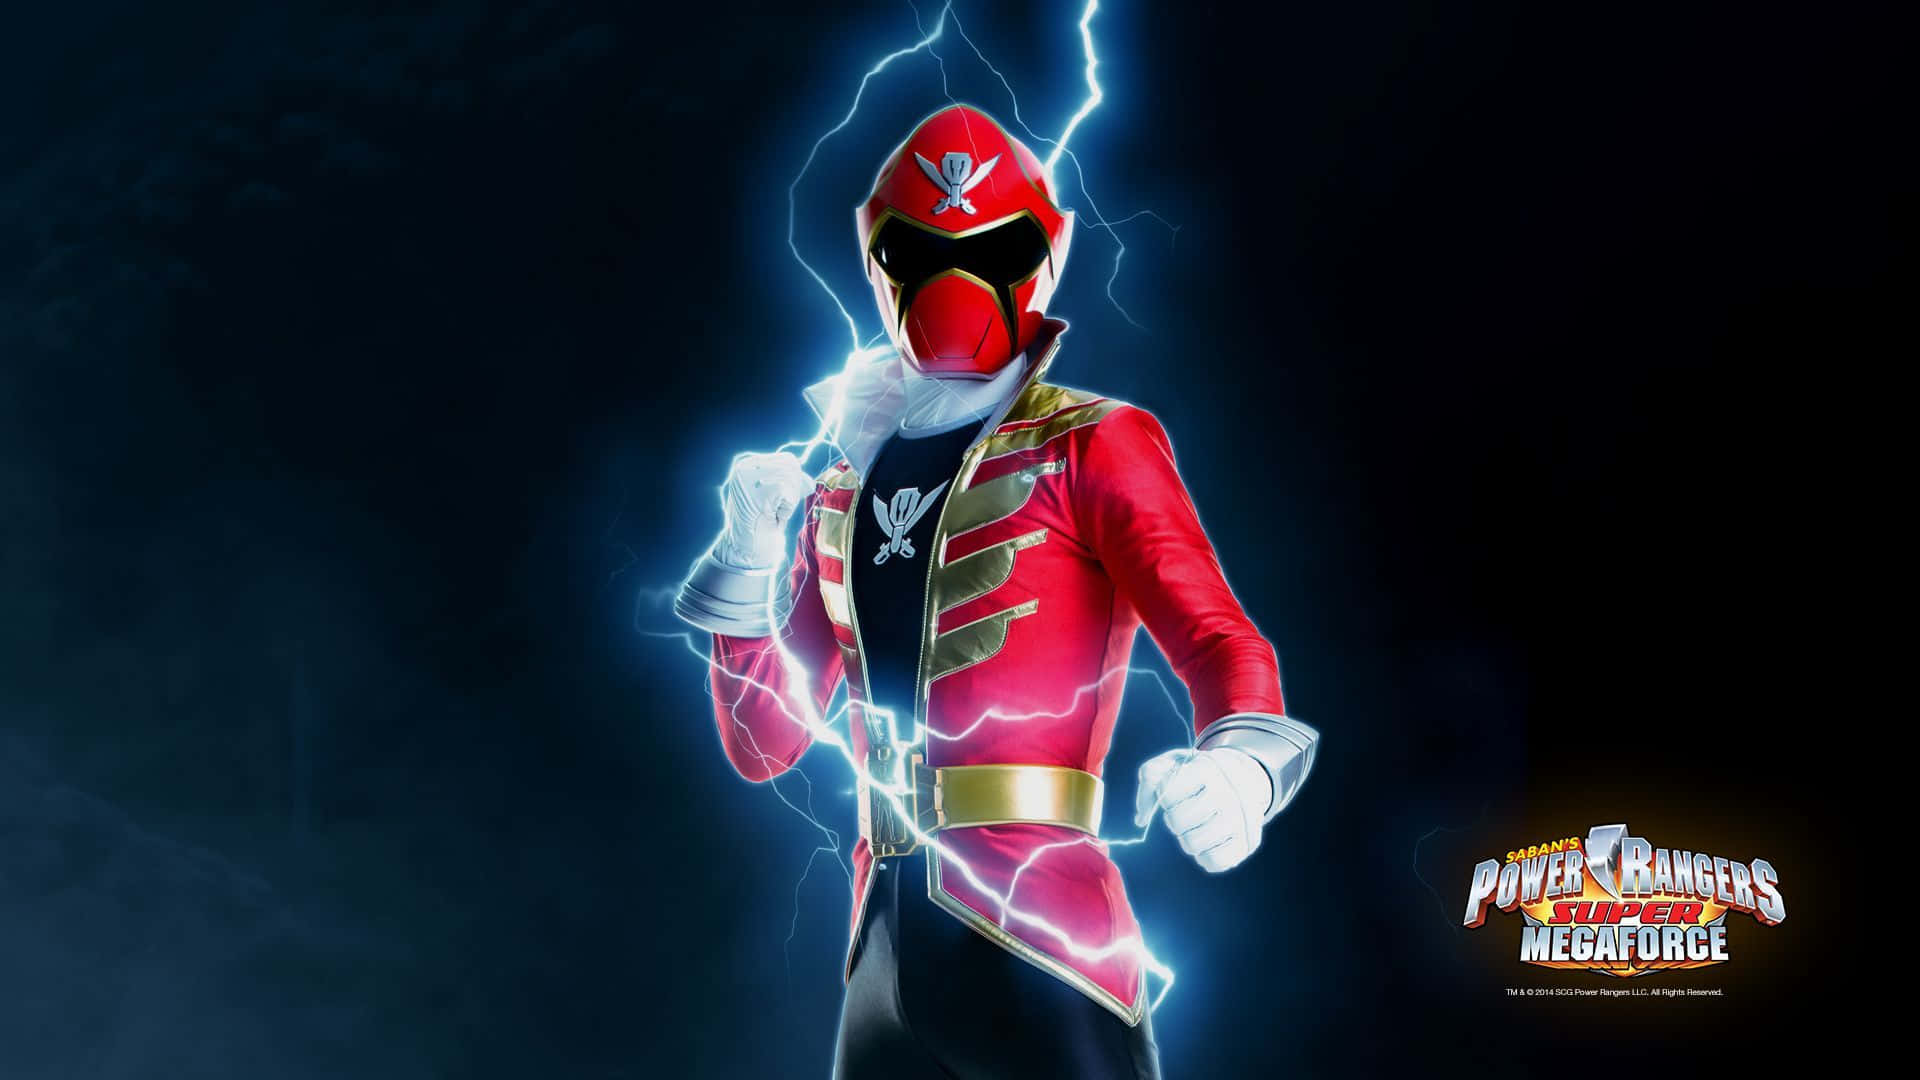 Mighty Morphin Power Rangers united and ready for action